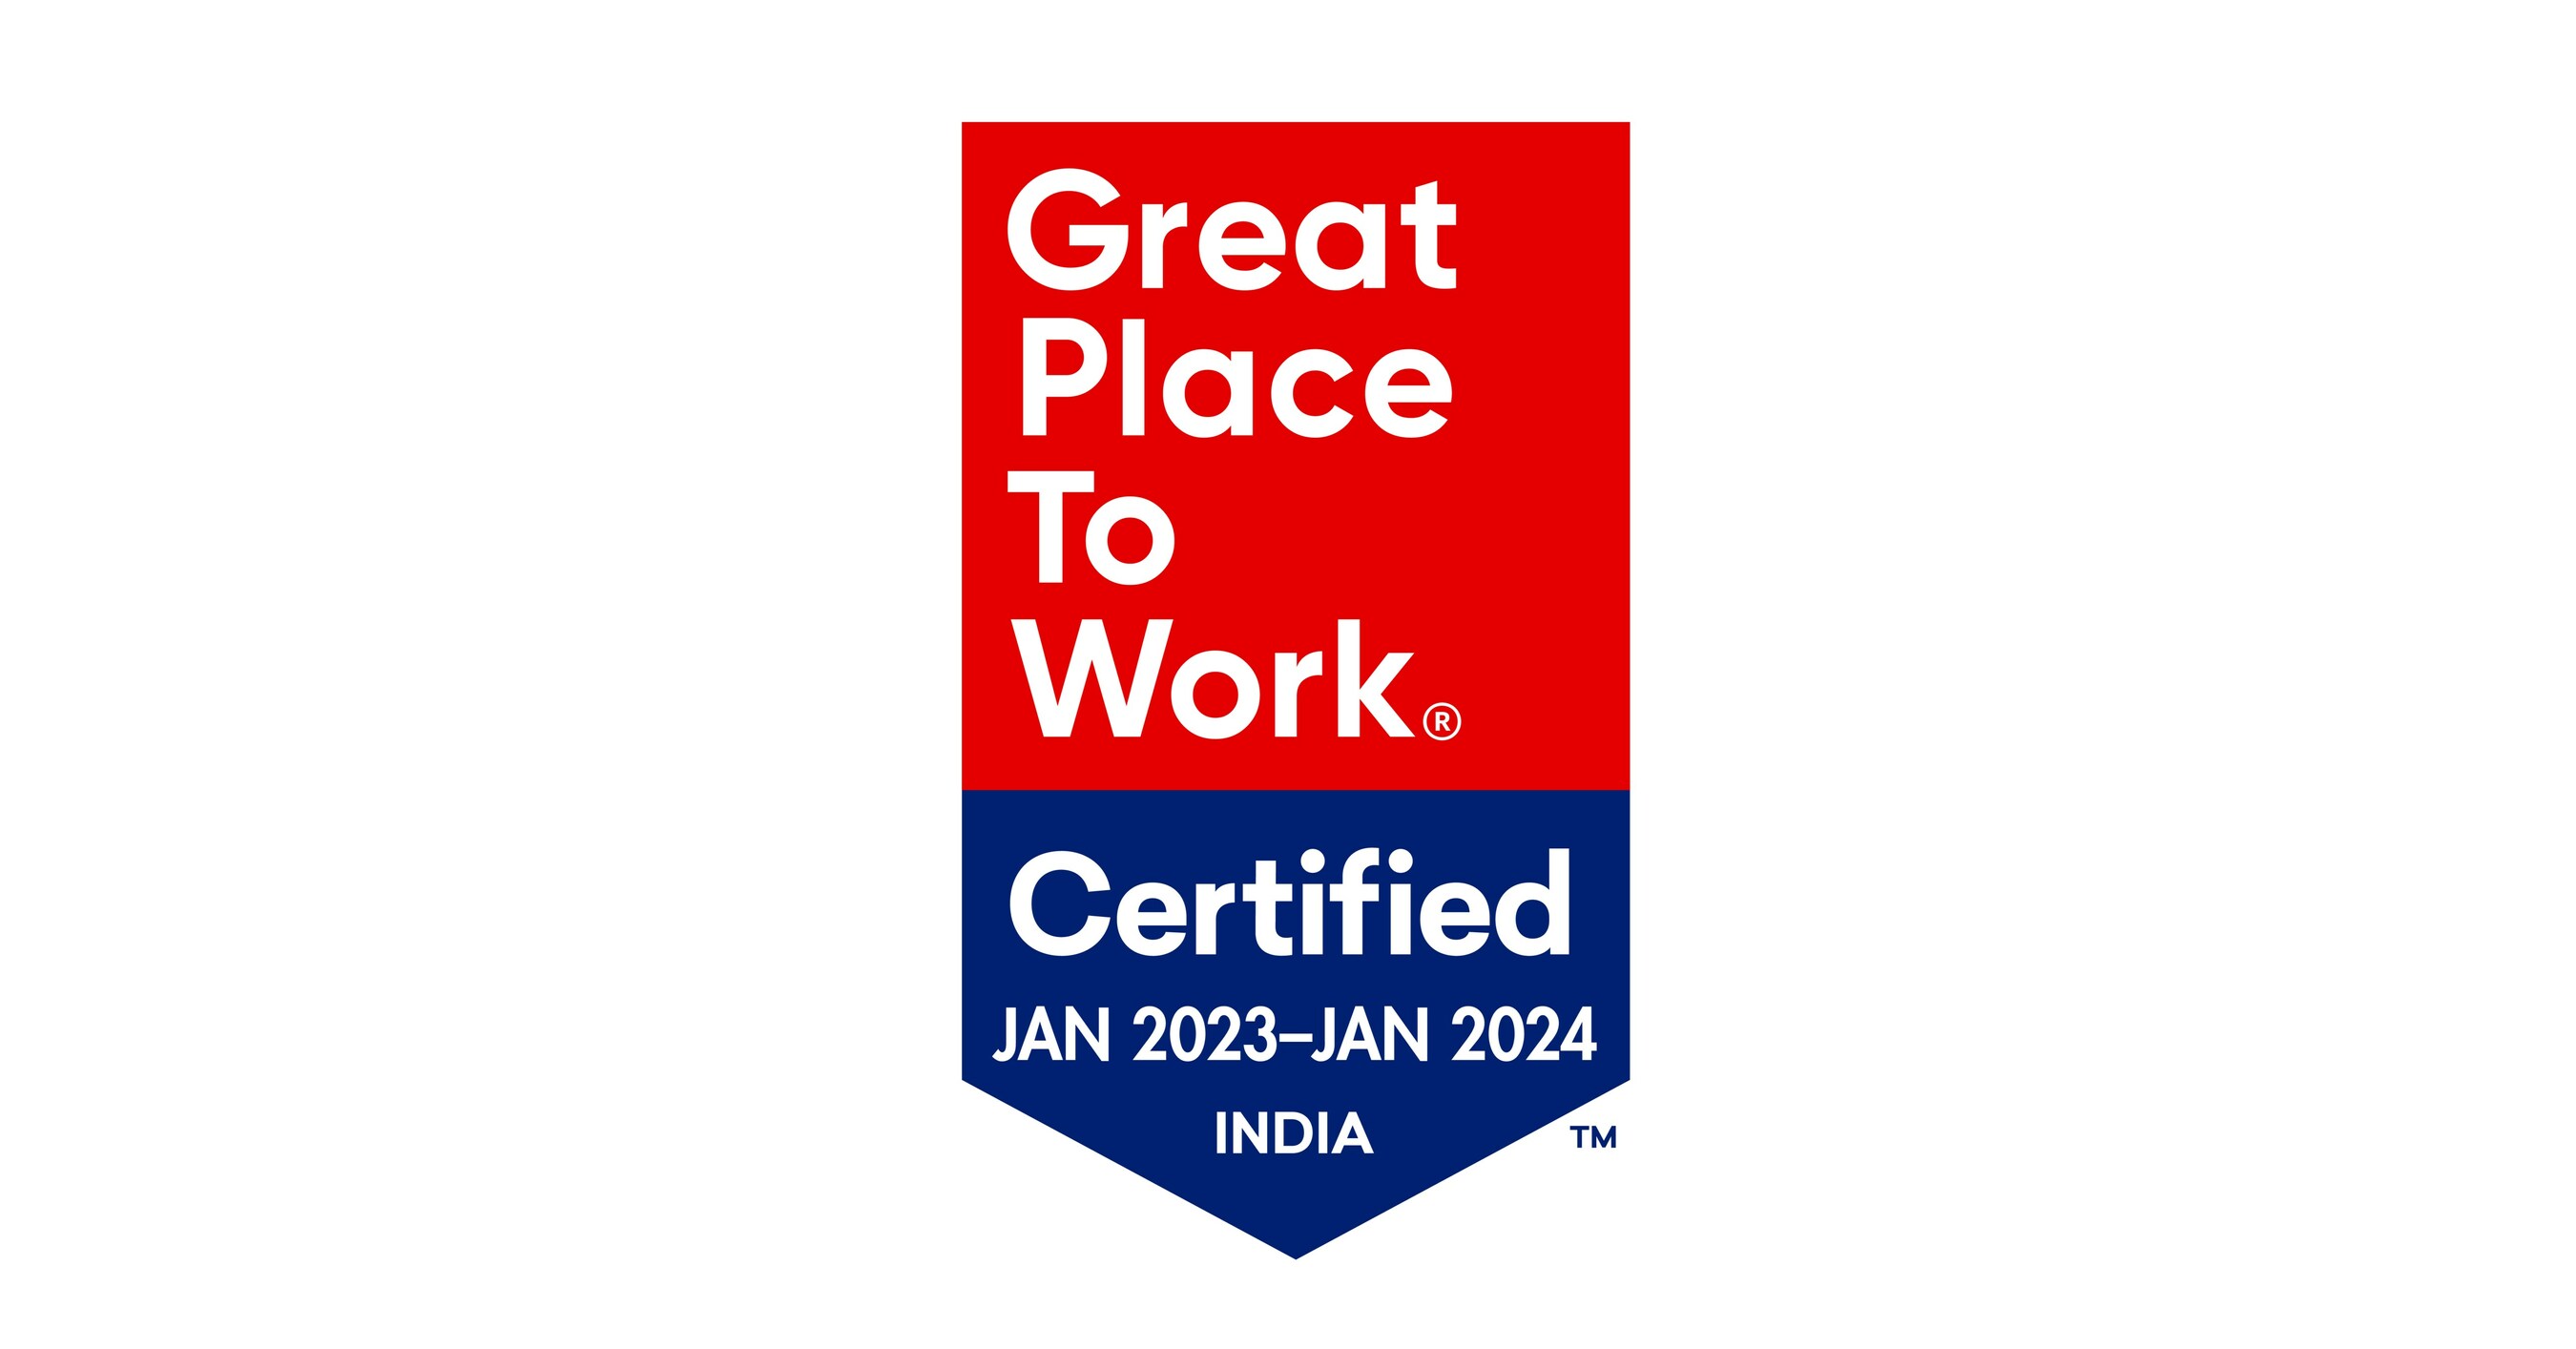 Quest Global is Great Place To Work Certified in India, for the Second